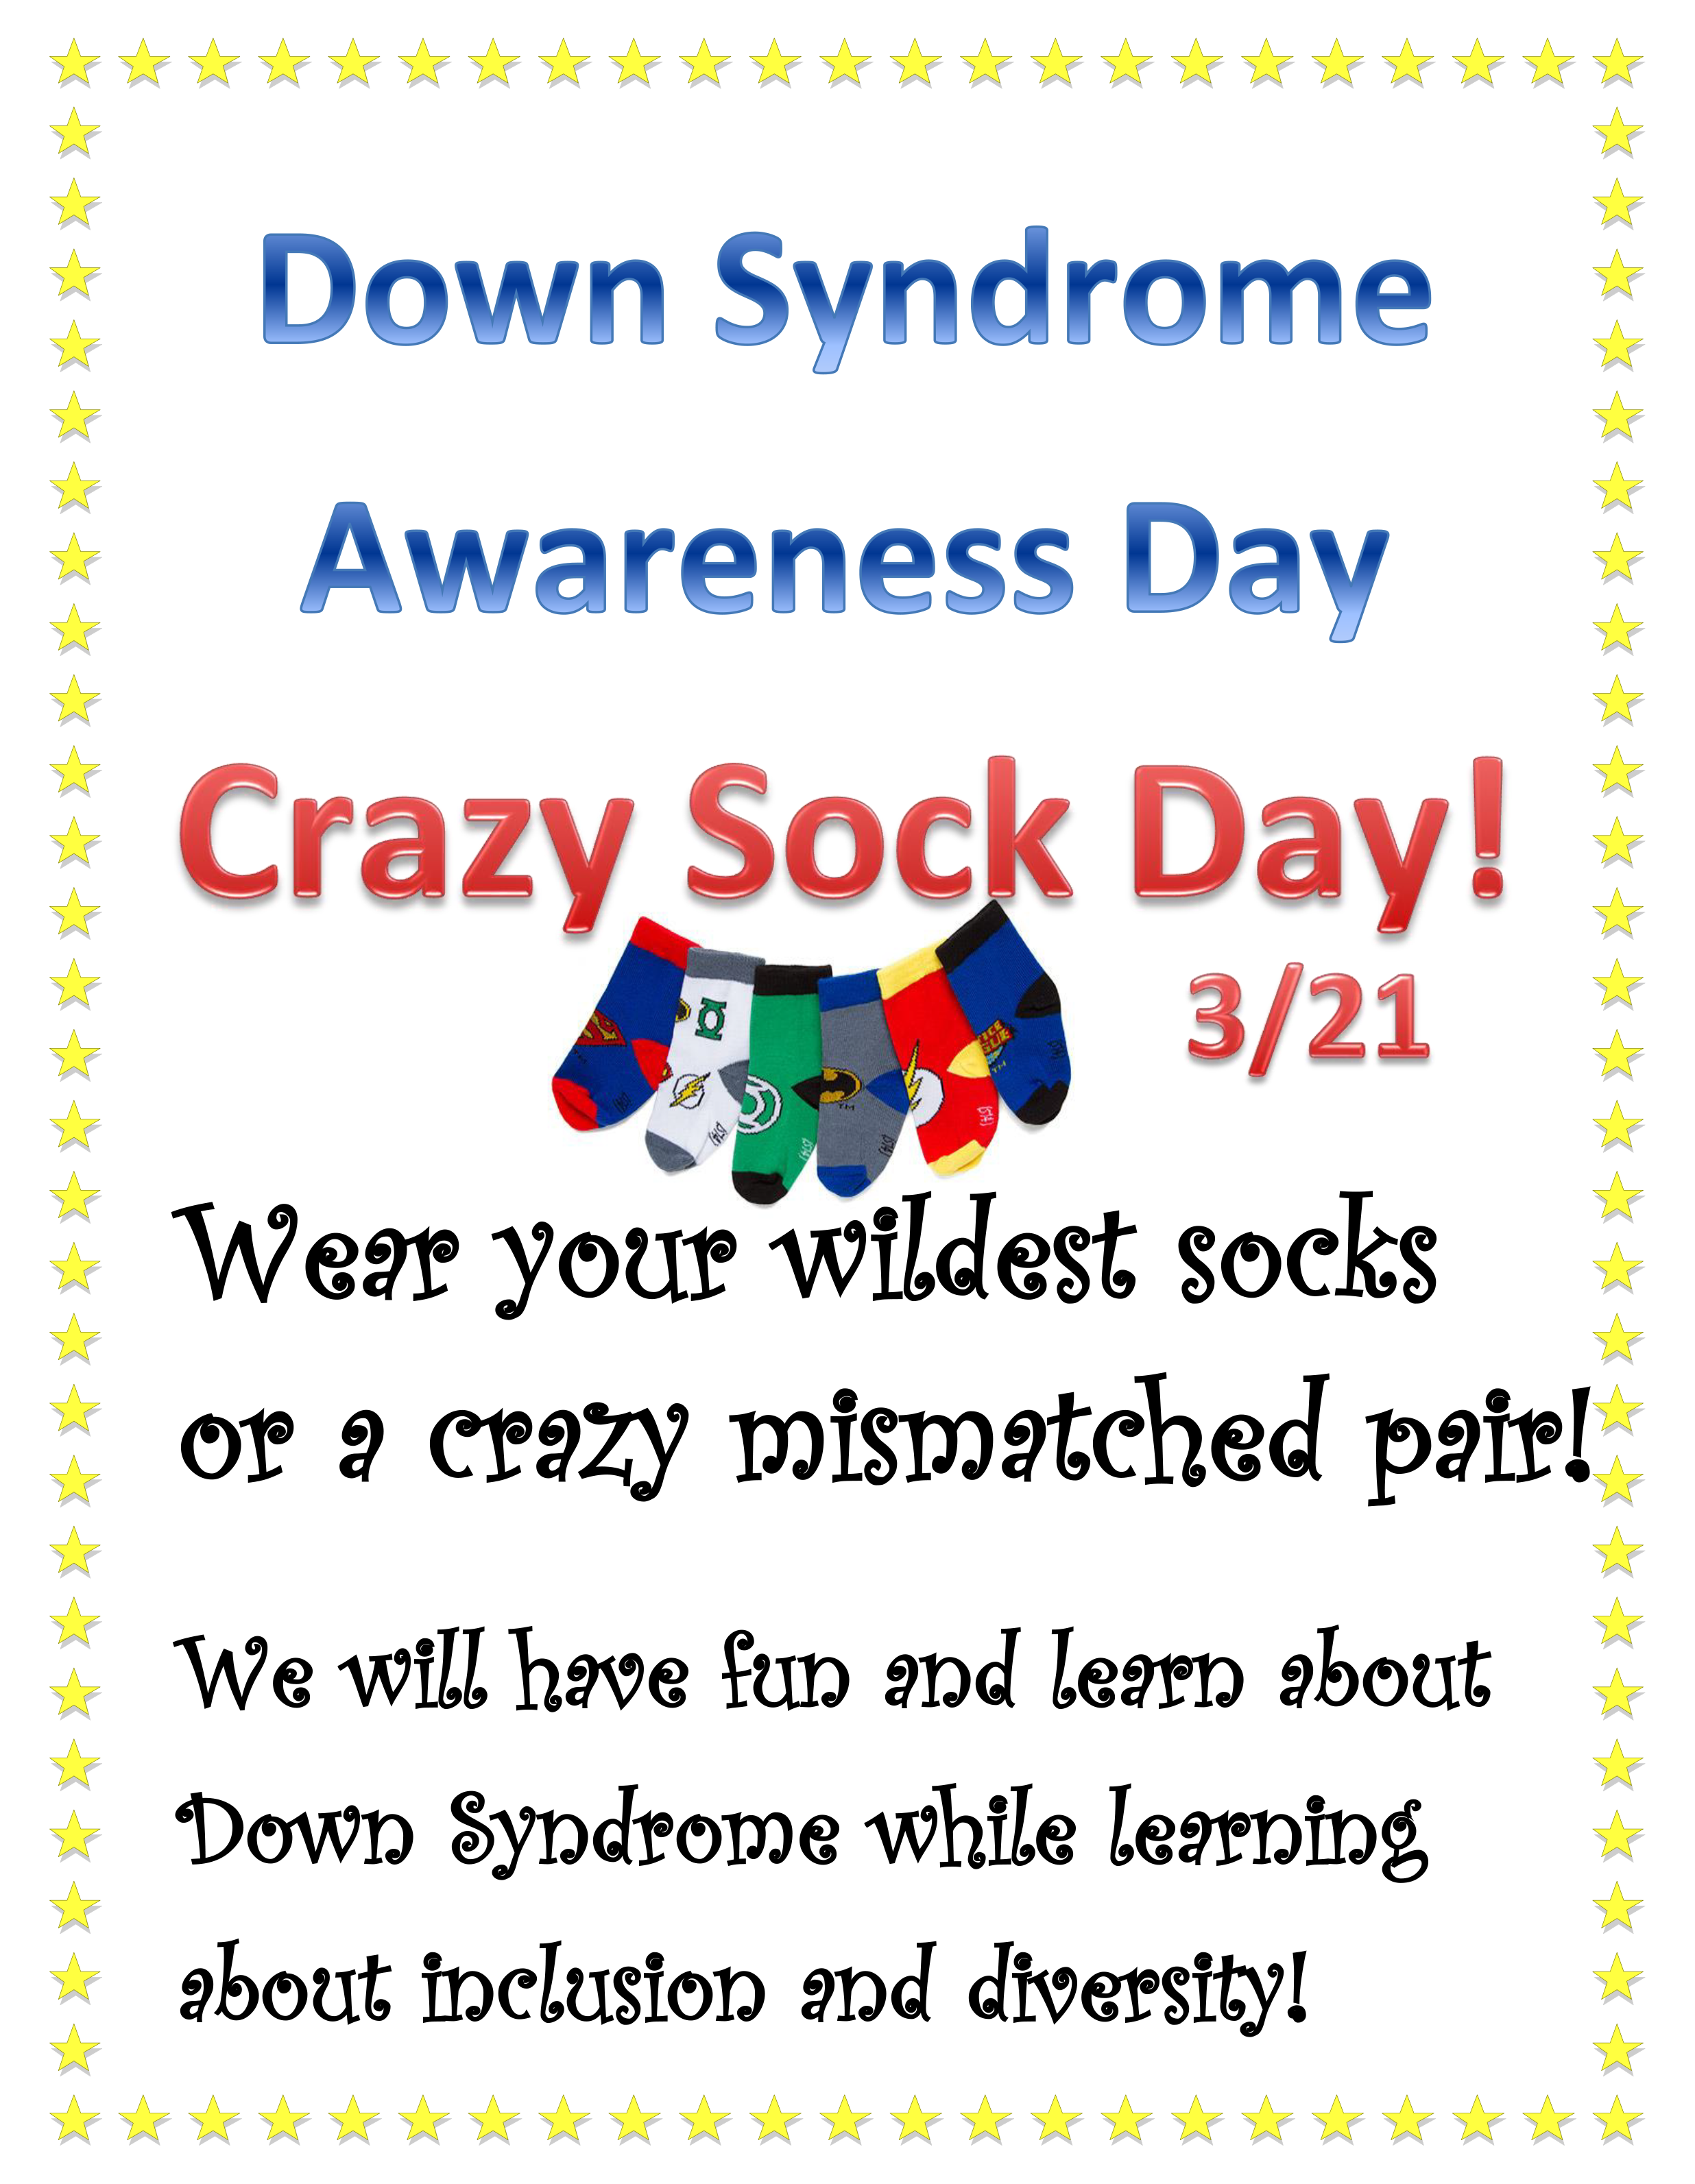 Down syndrome Awareness Day Happy Days Child Development Center